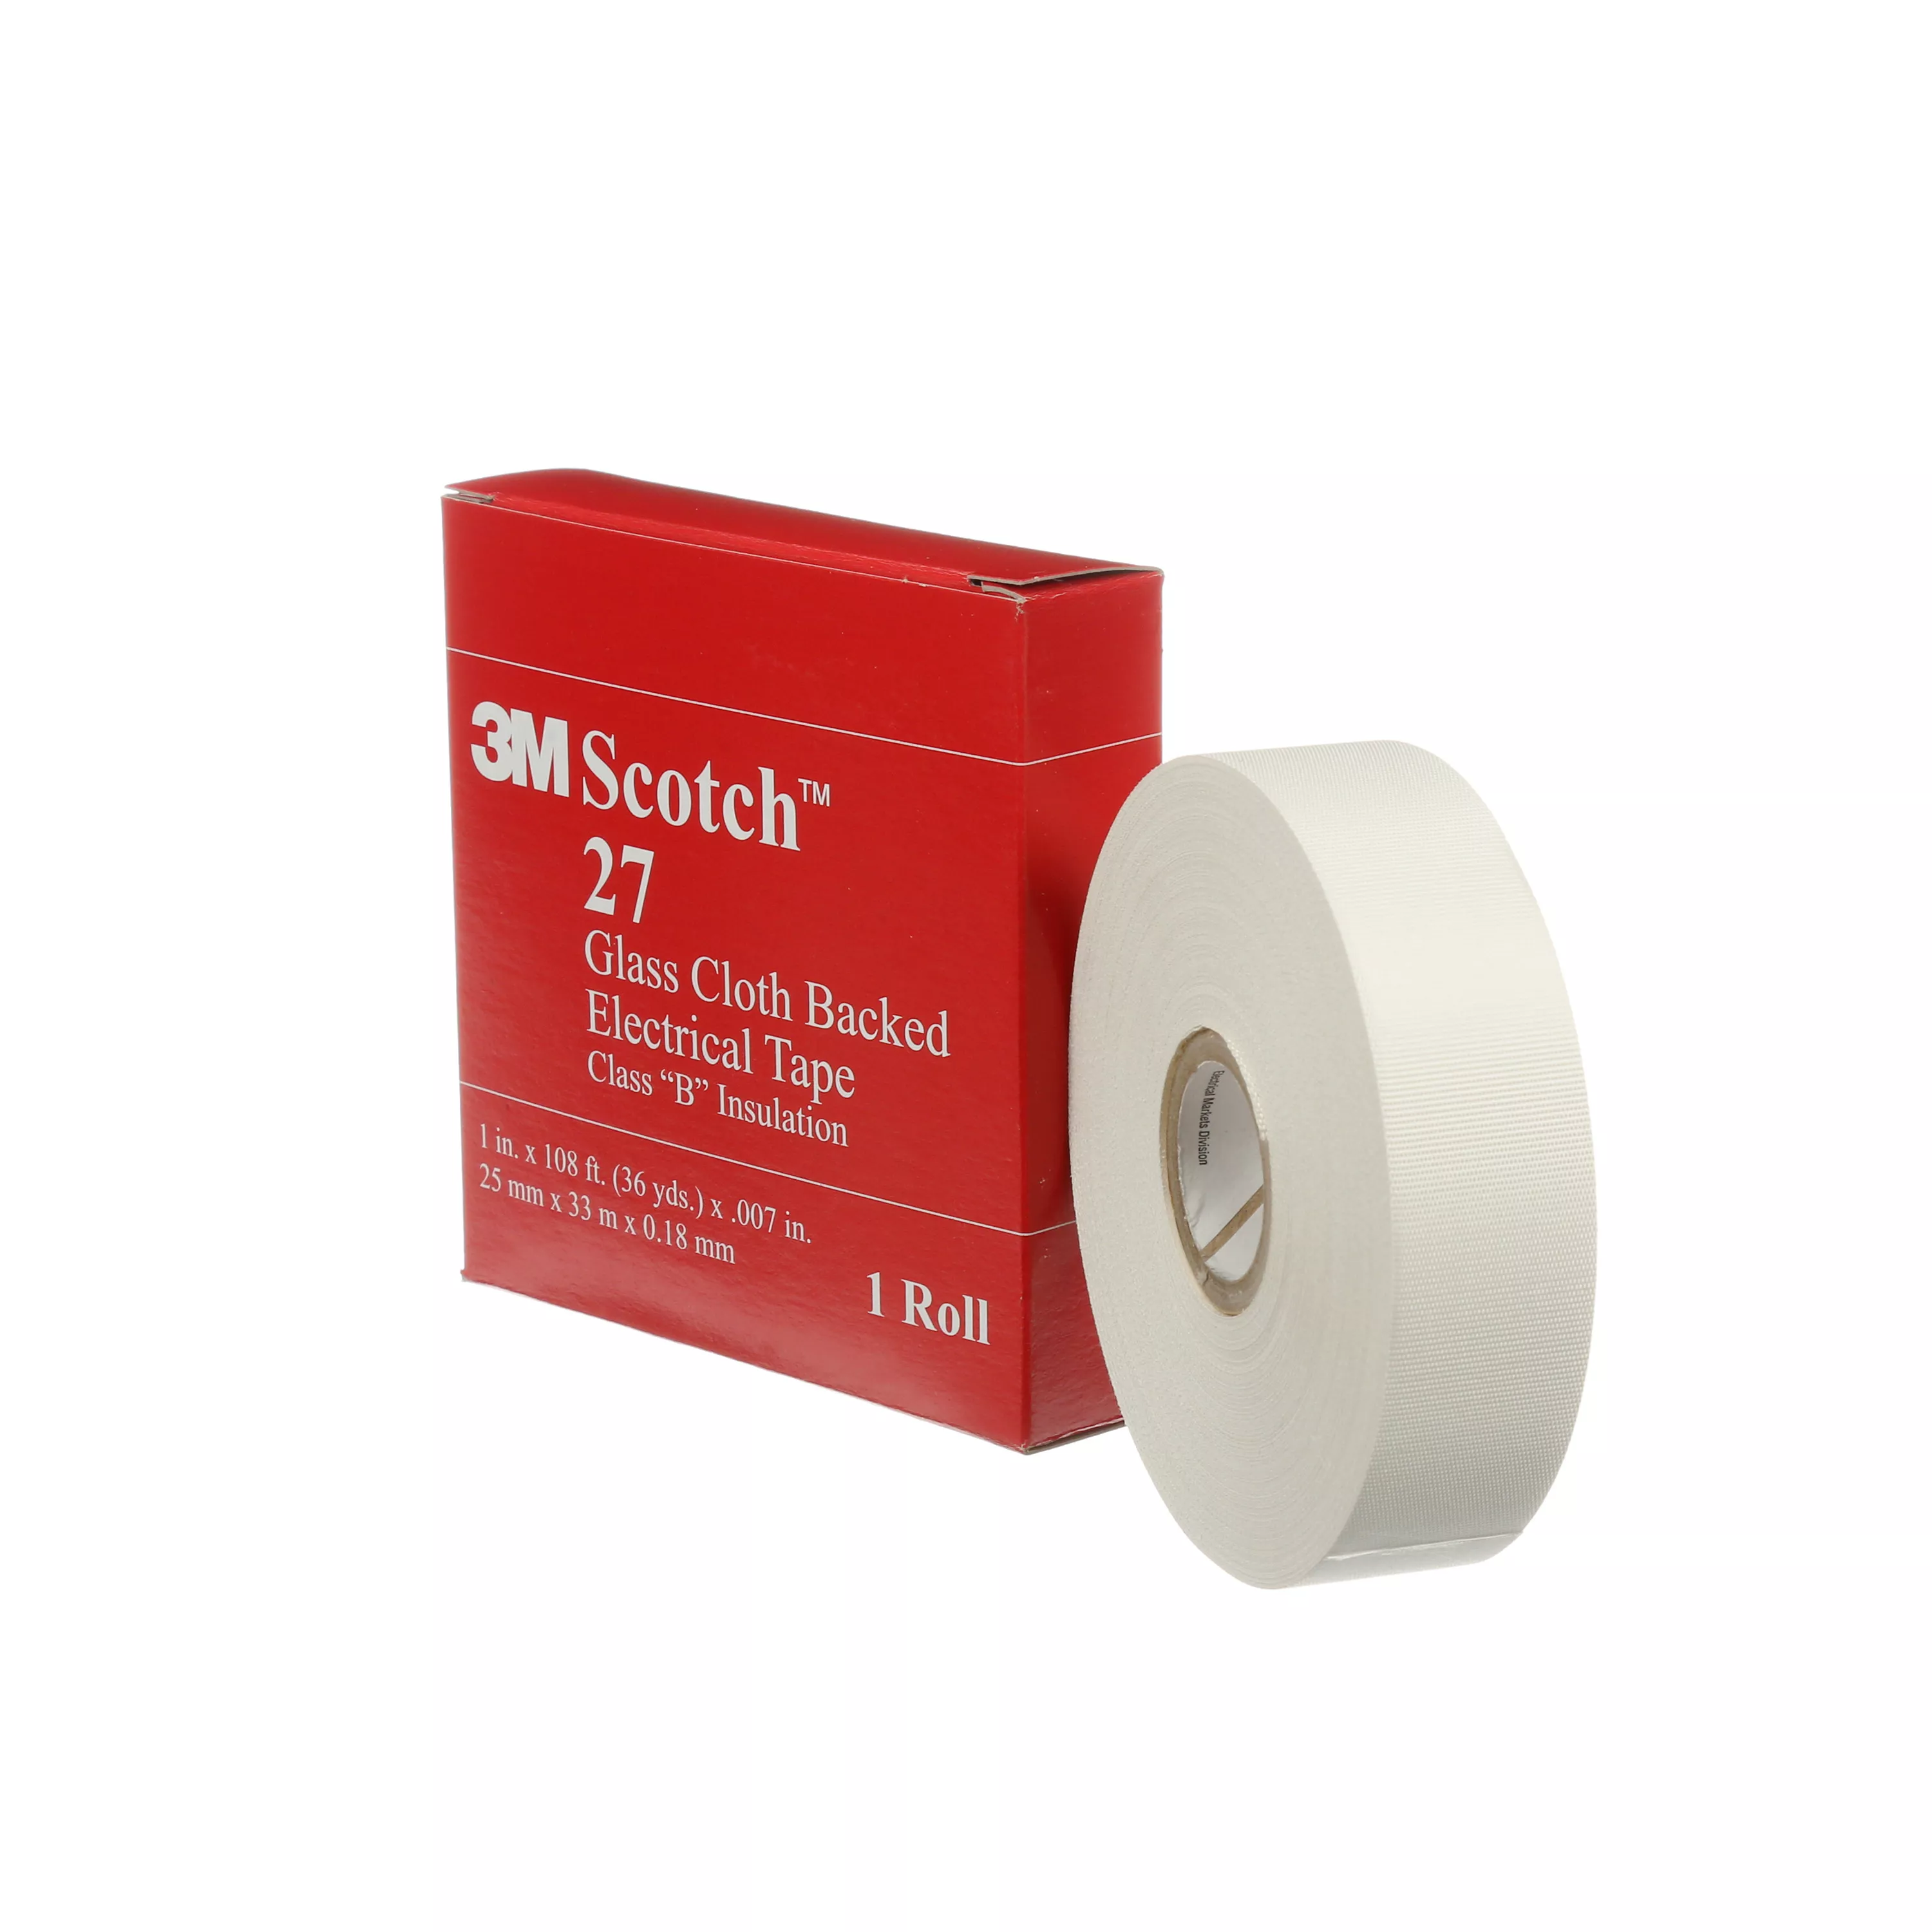 3M™ Glass Cloth Electrical Tape 27, White, Rubber Thermosetting
Adhesive, 1 in x 36 yd (24,4 mm x 33 m), 48/case